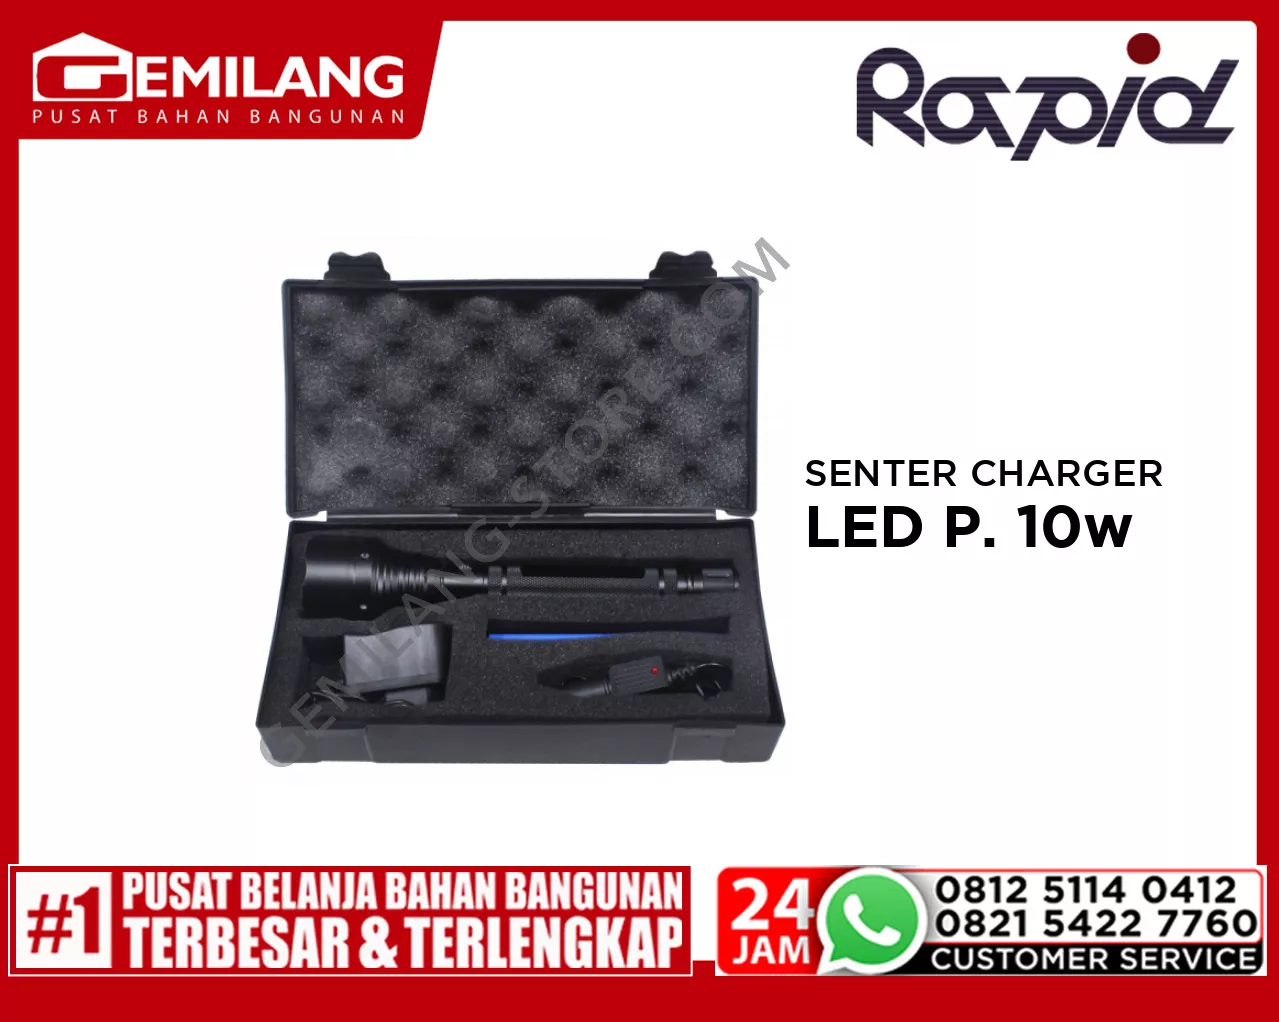 RAPID SENTER CHARGER LED POWER 10w R1112